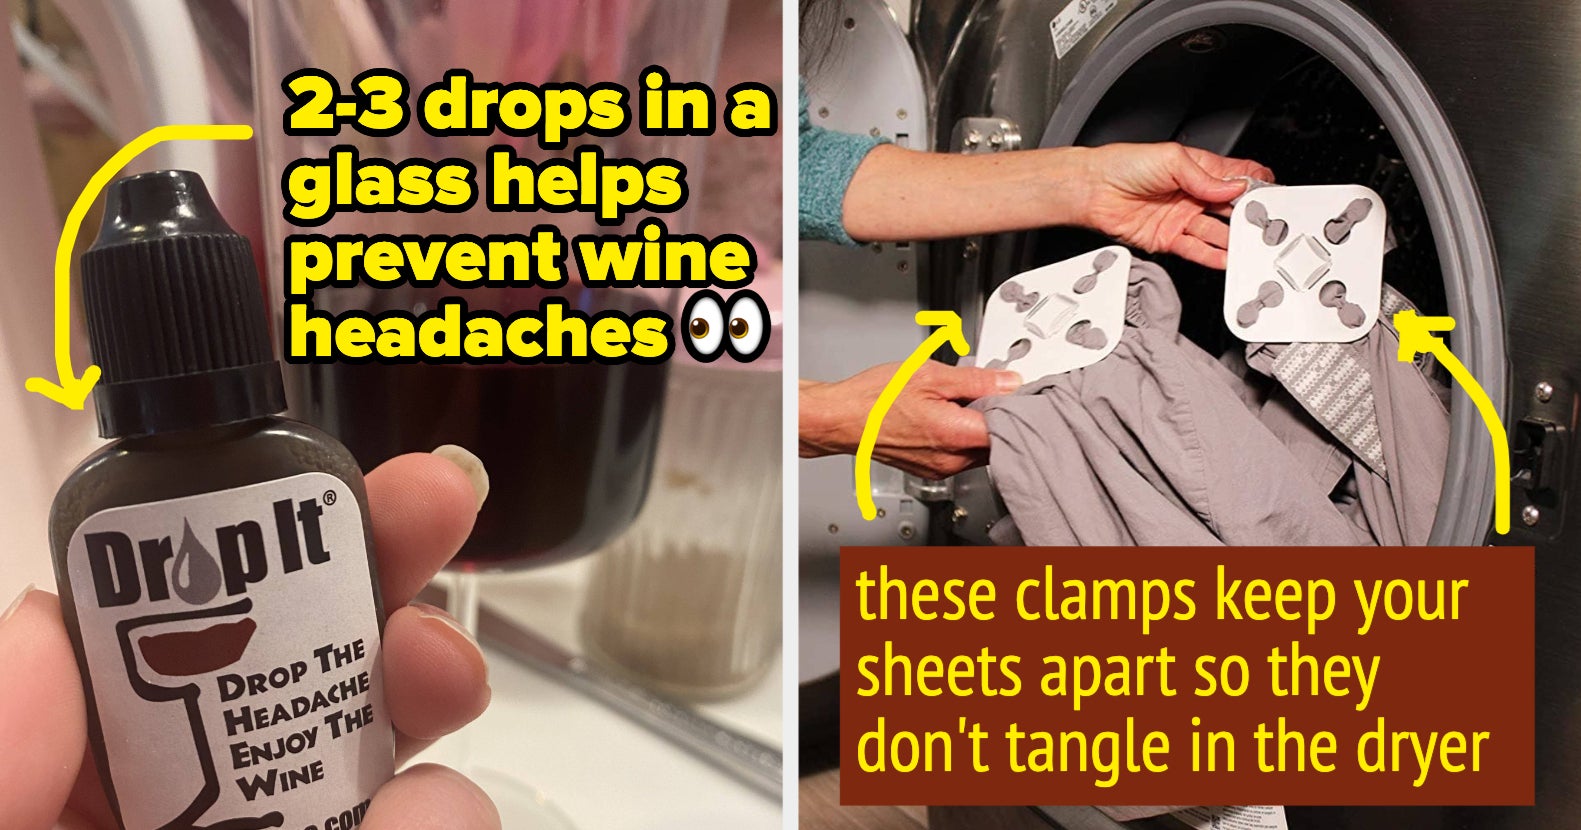 20  Products That'll Make Every Woman's Life Easier